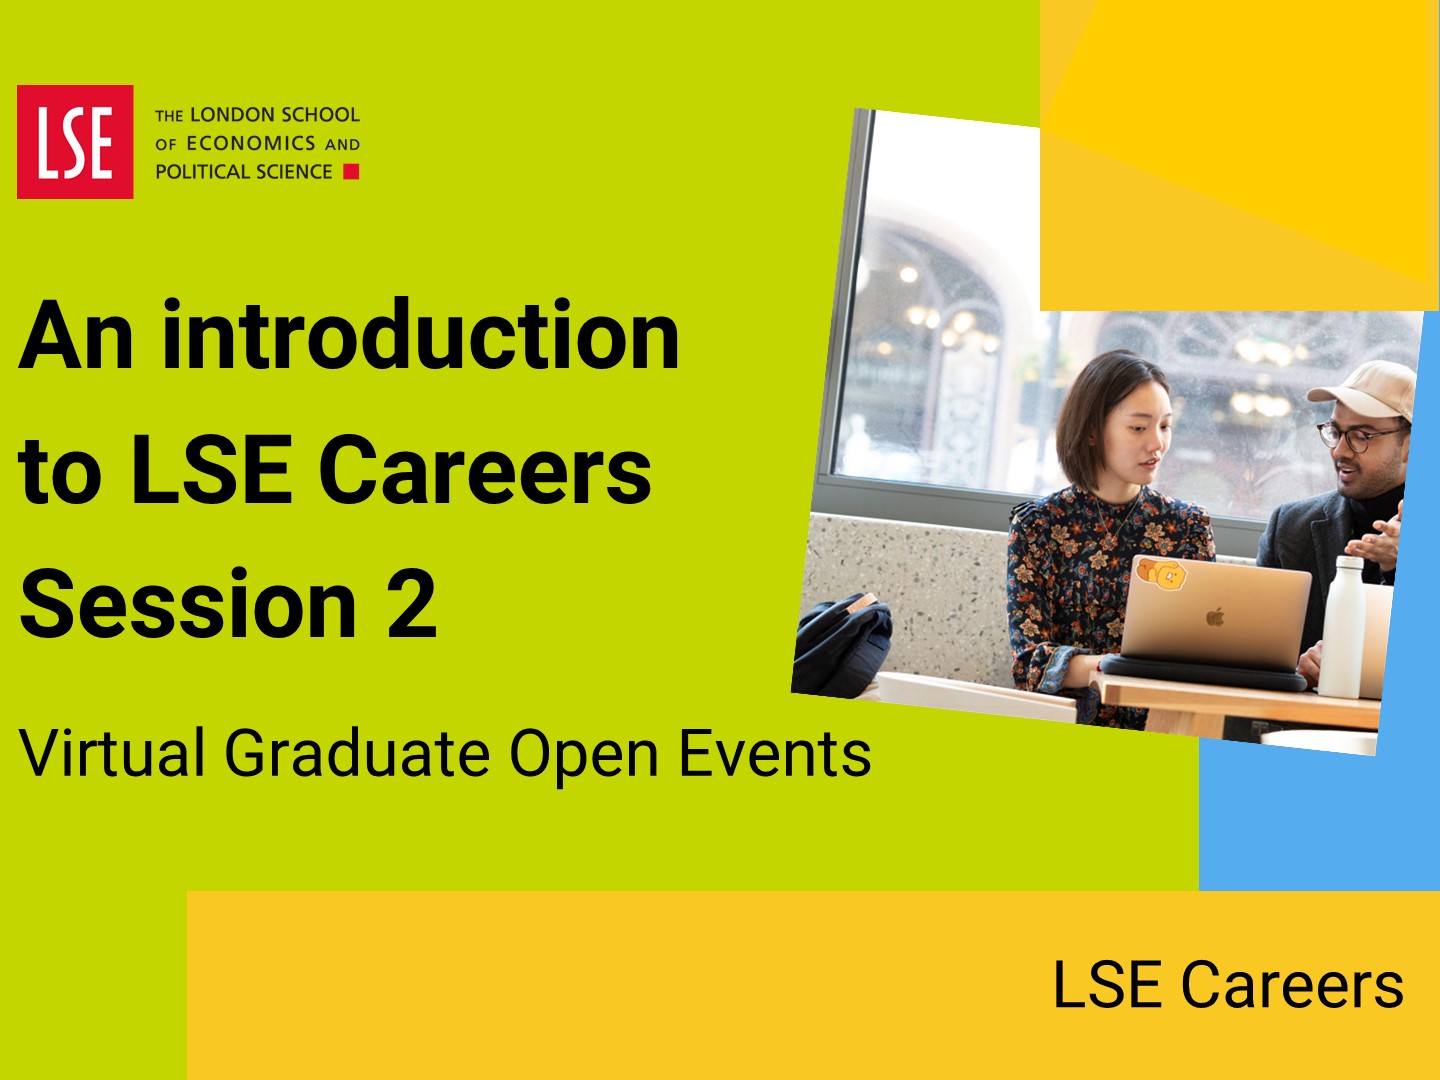 An introduction to LSE Careers (session 2)